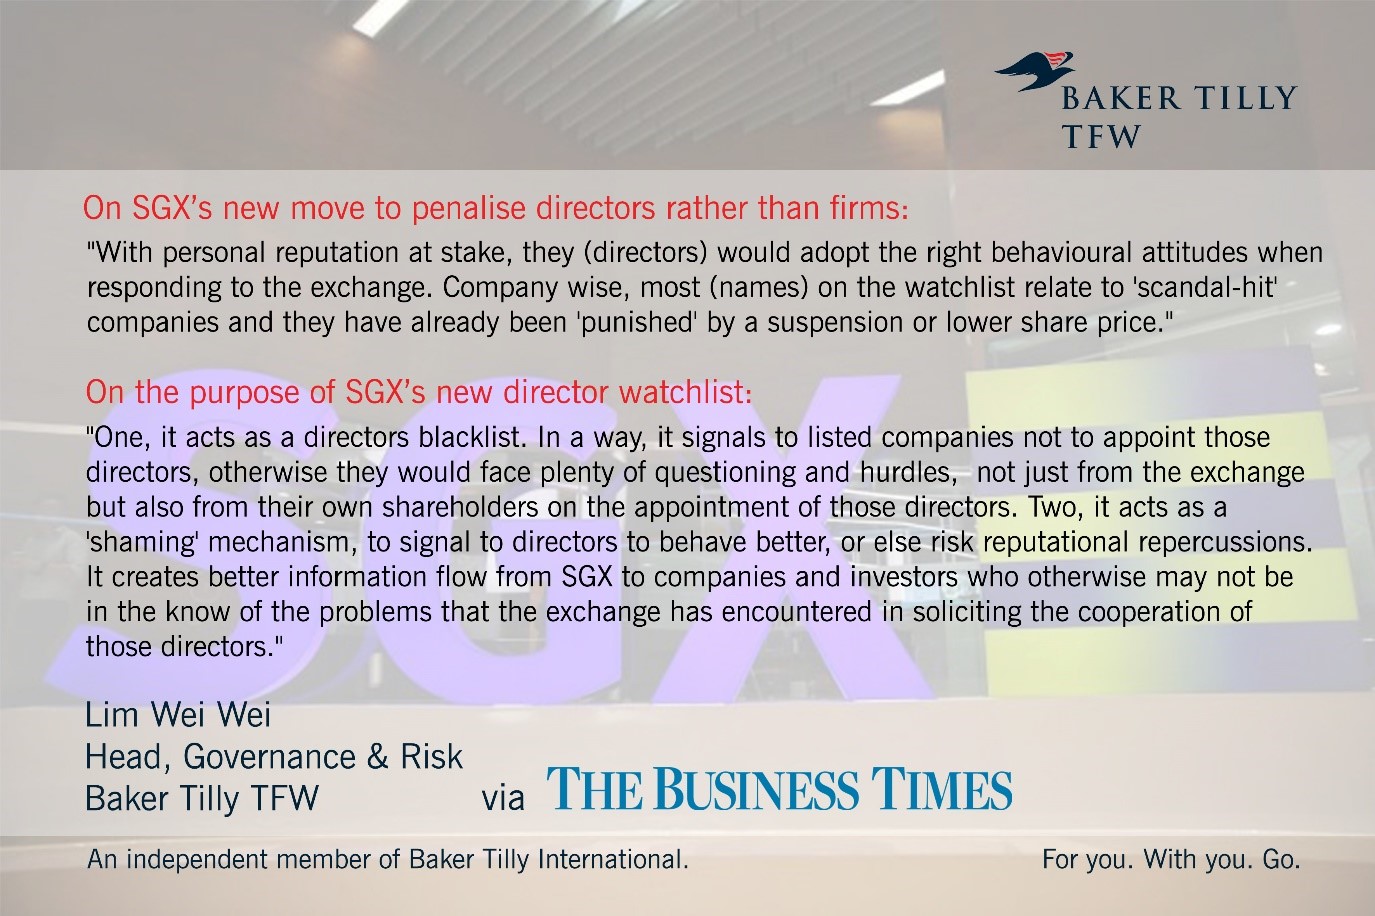 Baker Tilly TFW_TBT_SGX's New Move to Penalise Directors